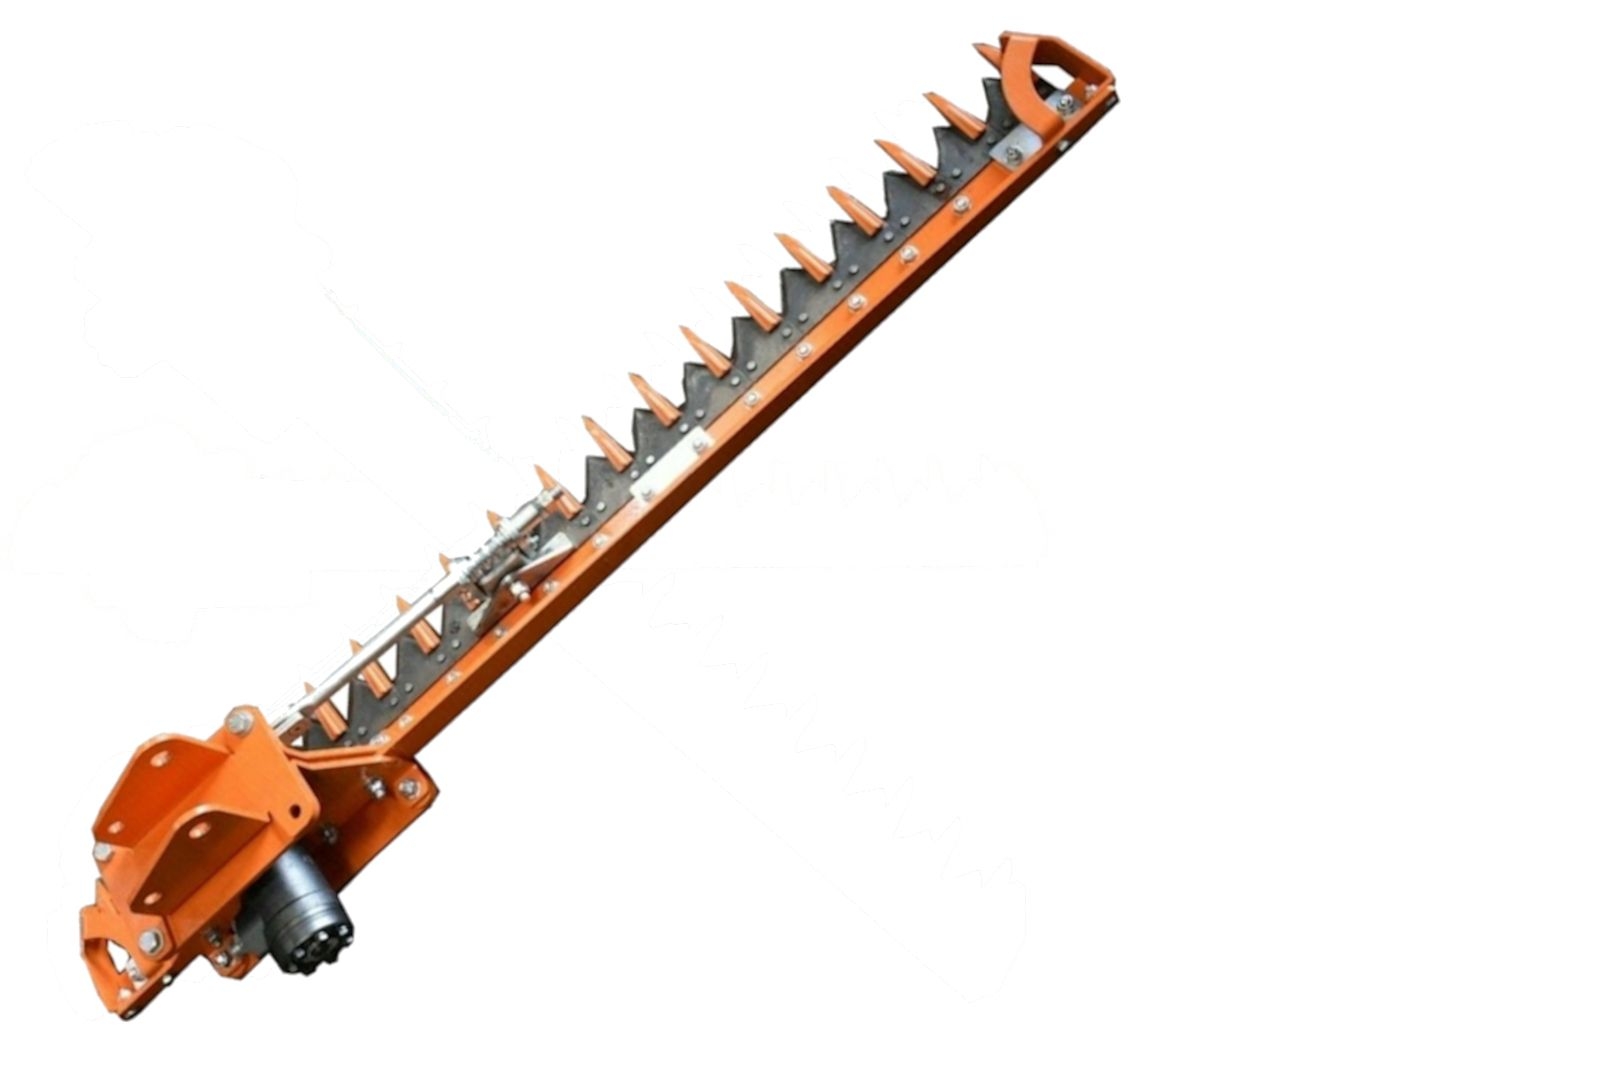 MDL Mini Digger – Excavator Hedge Cutter Attachment – Manufactured in Britain. – Flow Diverter Valve – Hedge Cutting – 3 Year Warranty – MDL Power Up